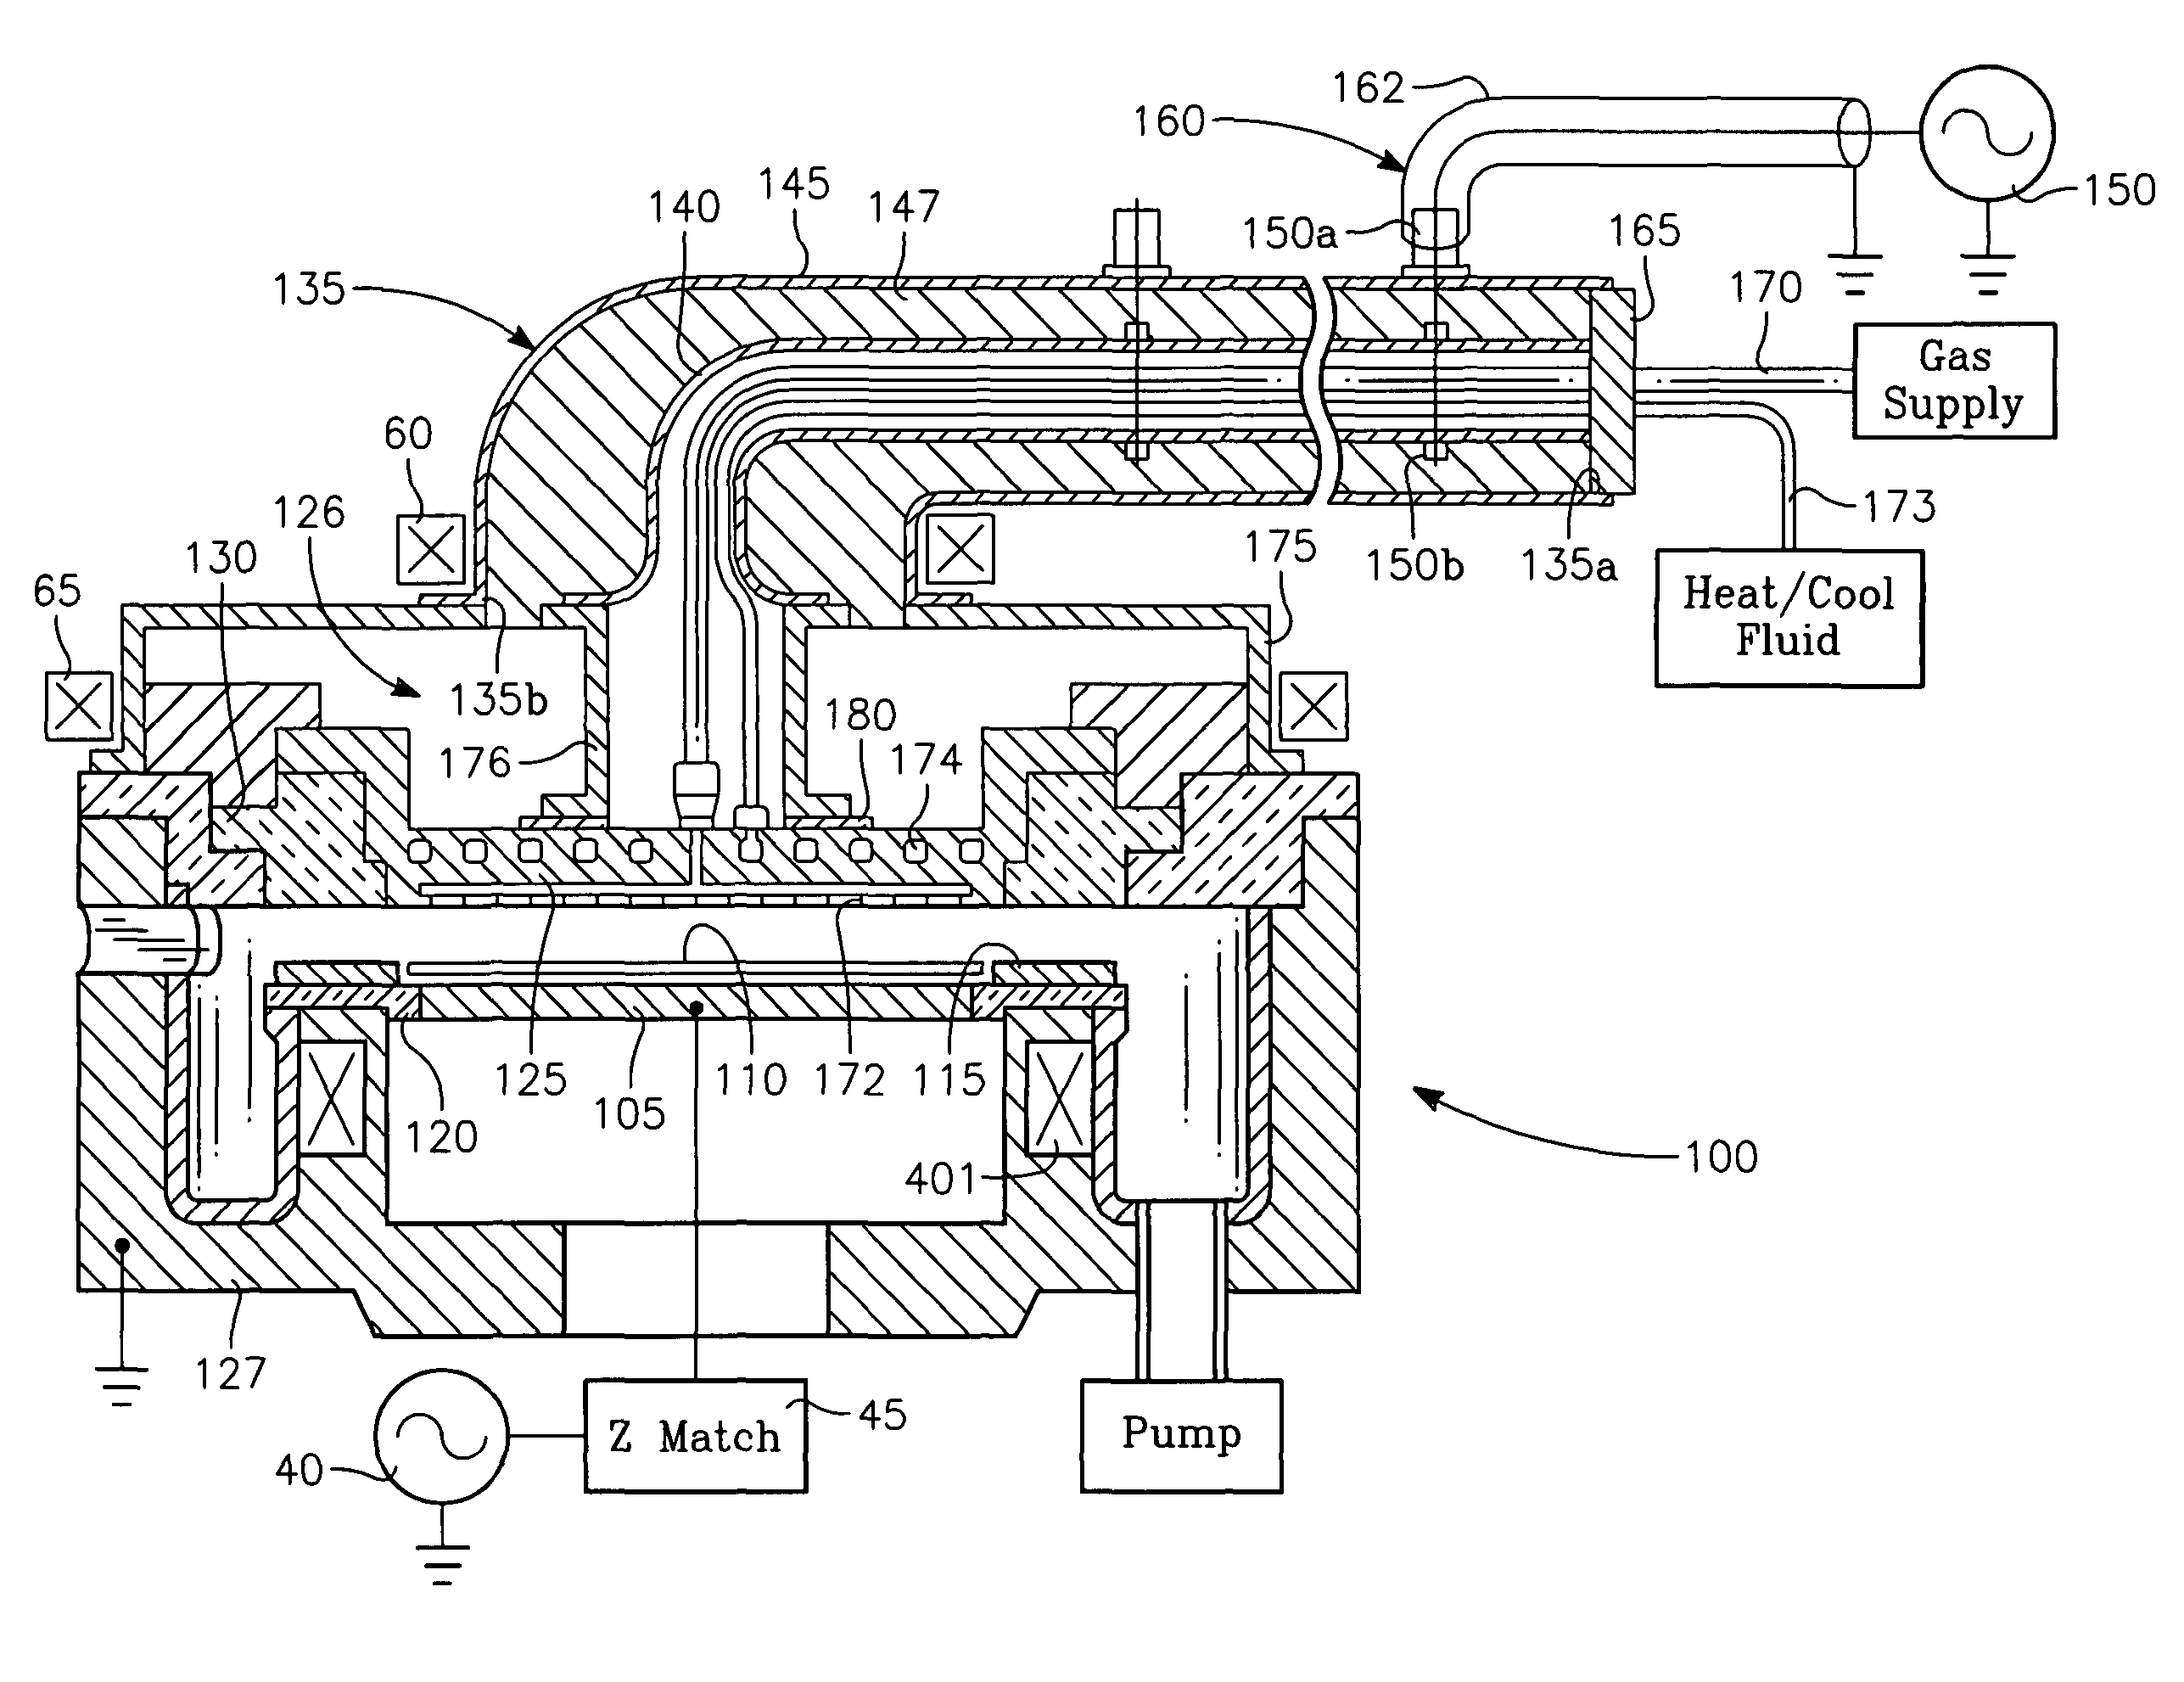 Plasma reactor with minimal D.C. coils for cusp, solenoid and mirror fields for plasma uniformity and device damage reduction